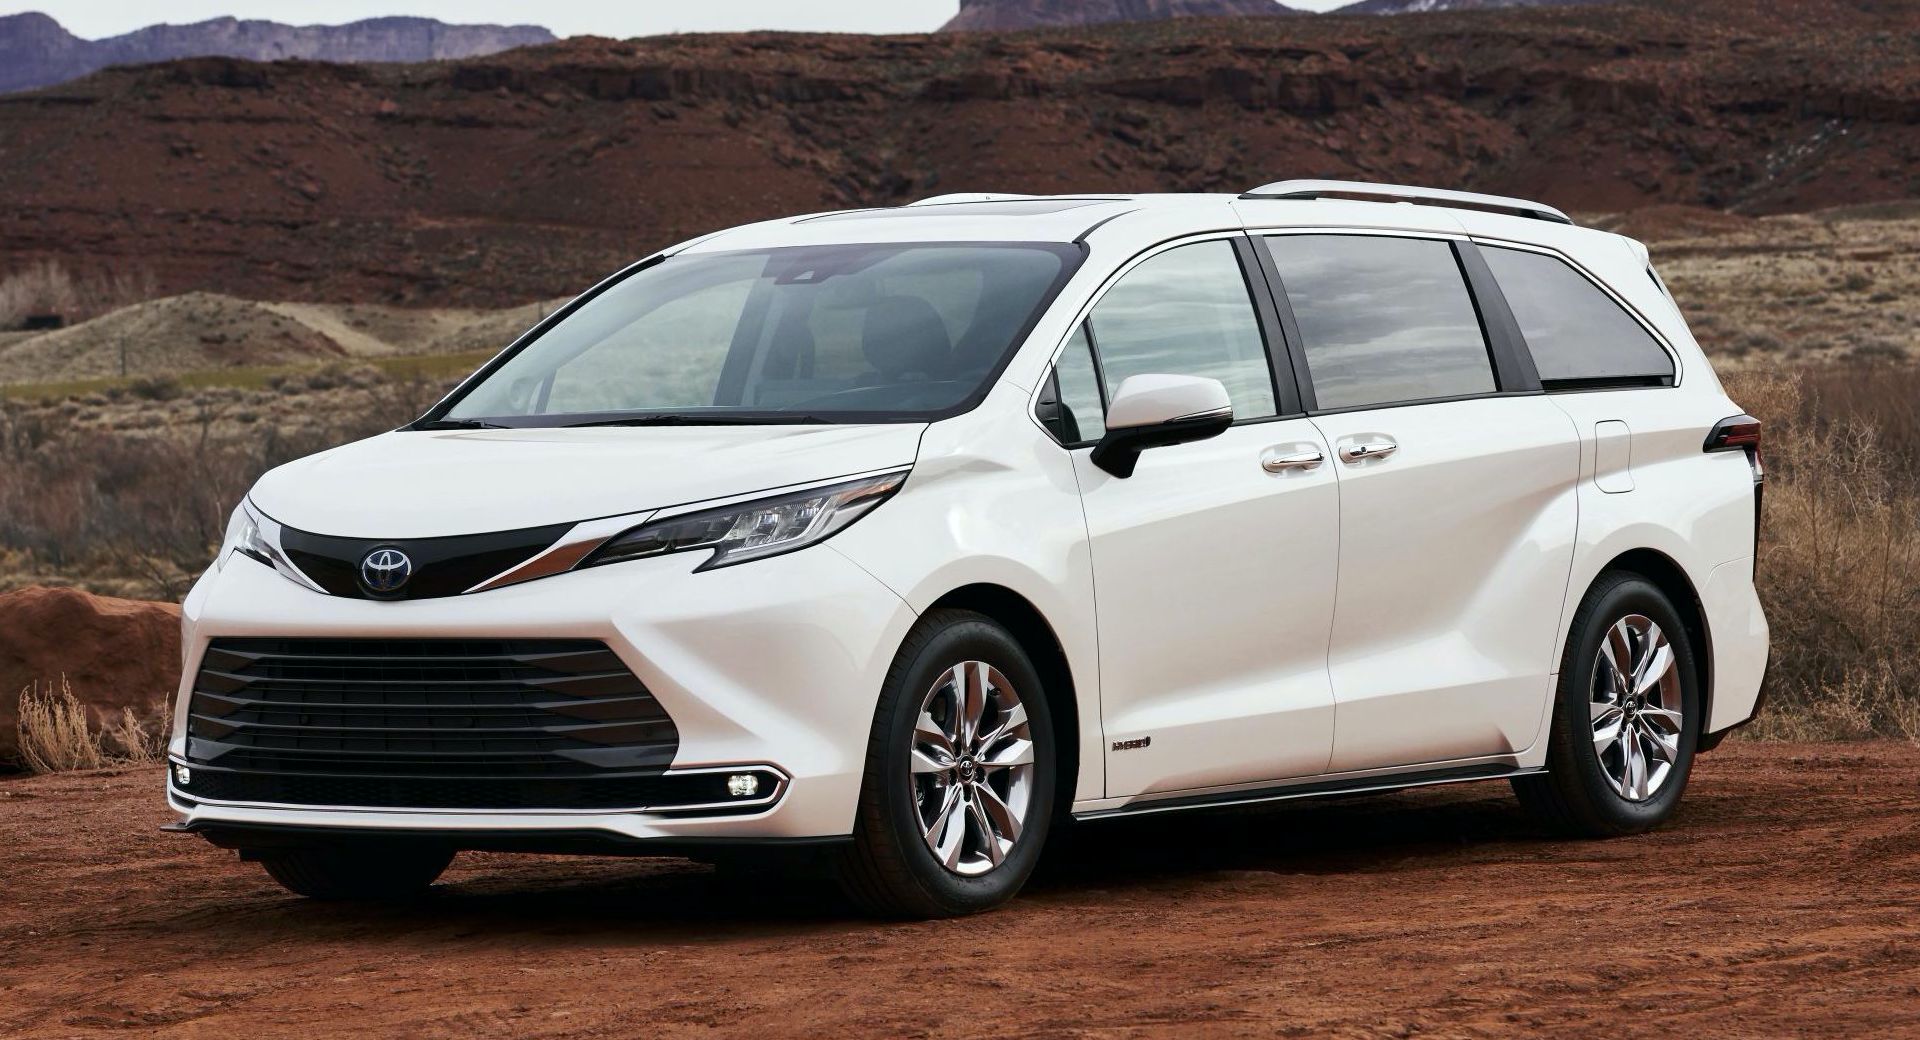 Seat Belts That Could Tear In Crash Prompt Recall Of 2022 Toyota Sienna